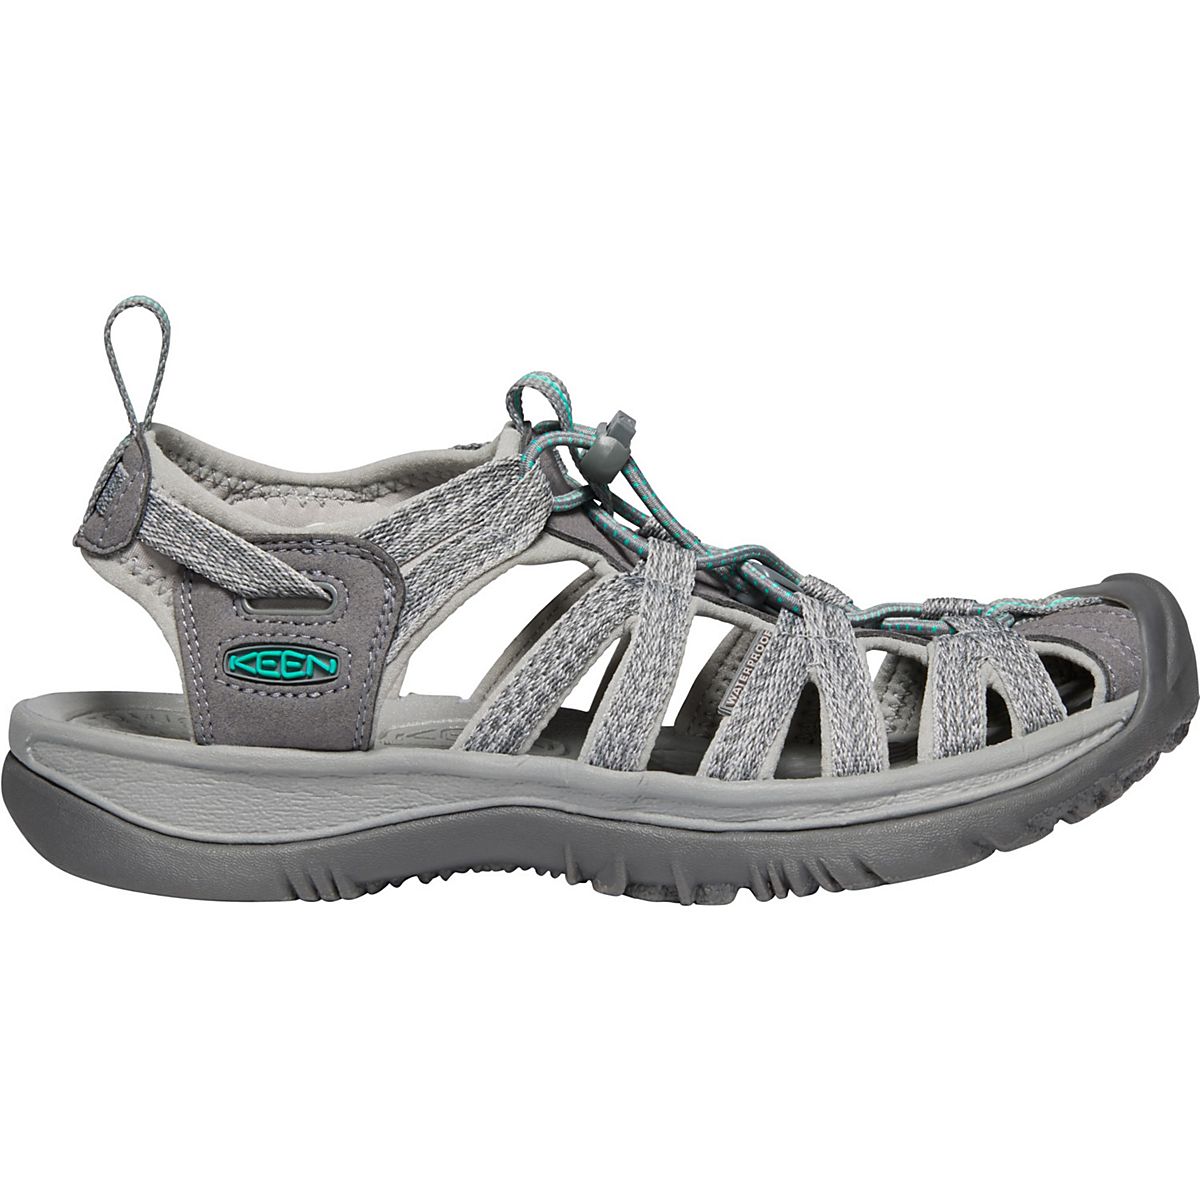 KEEN Women's Whisper Sandals | Free Shipping at Academy